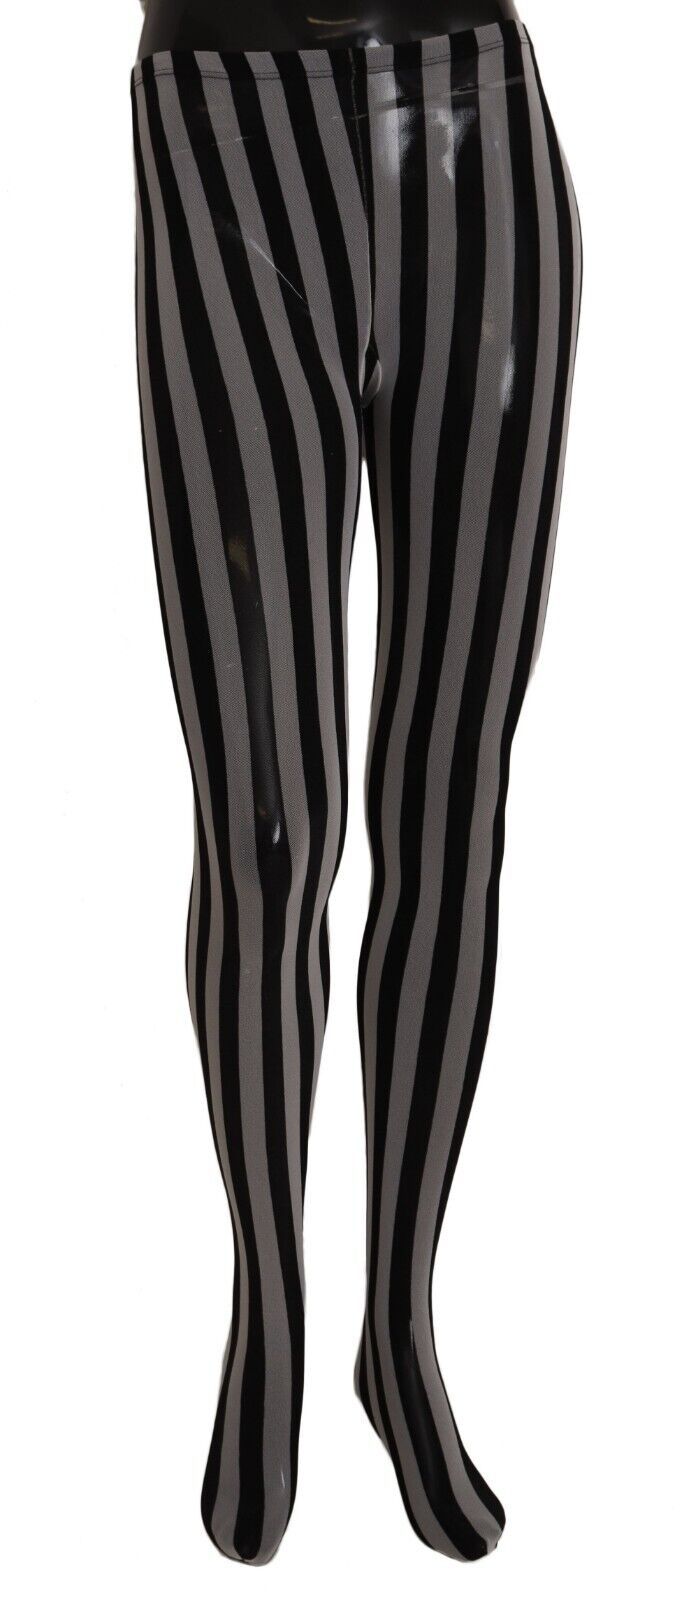 Dolce & Gabbana Black and White Striped Luxury Women's Tights